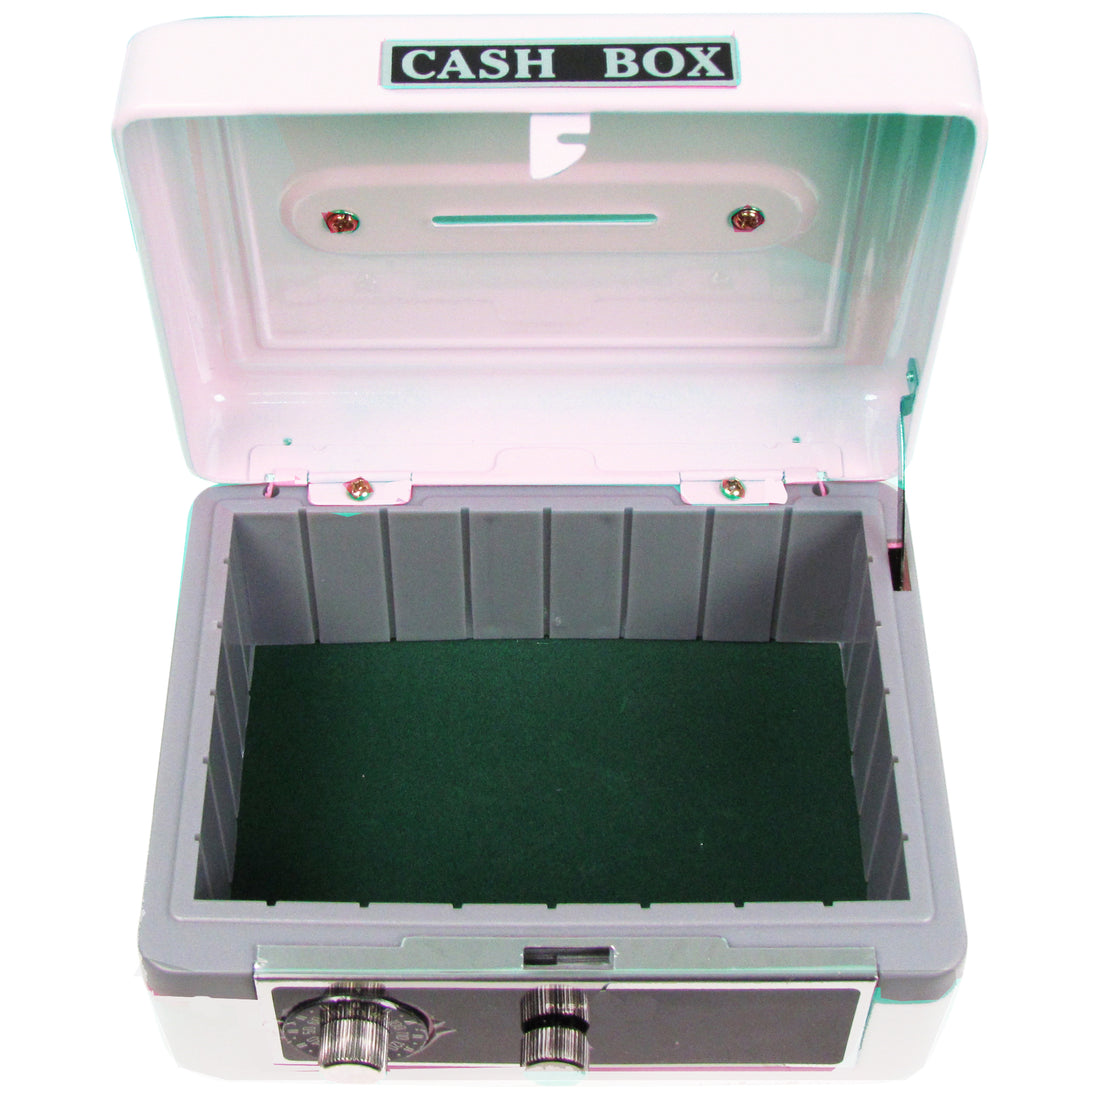 Personalized White Cash Box with Shark Tank design